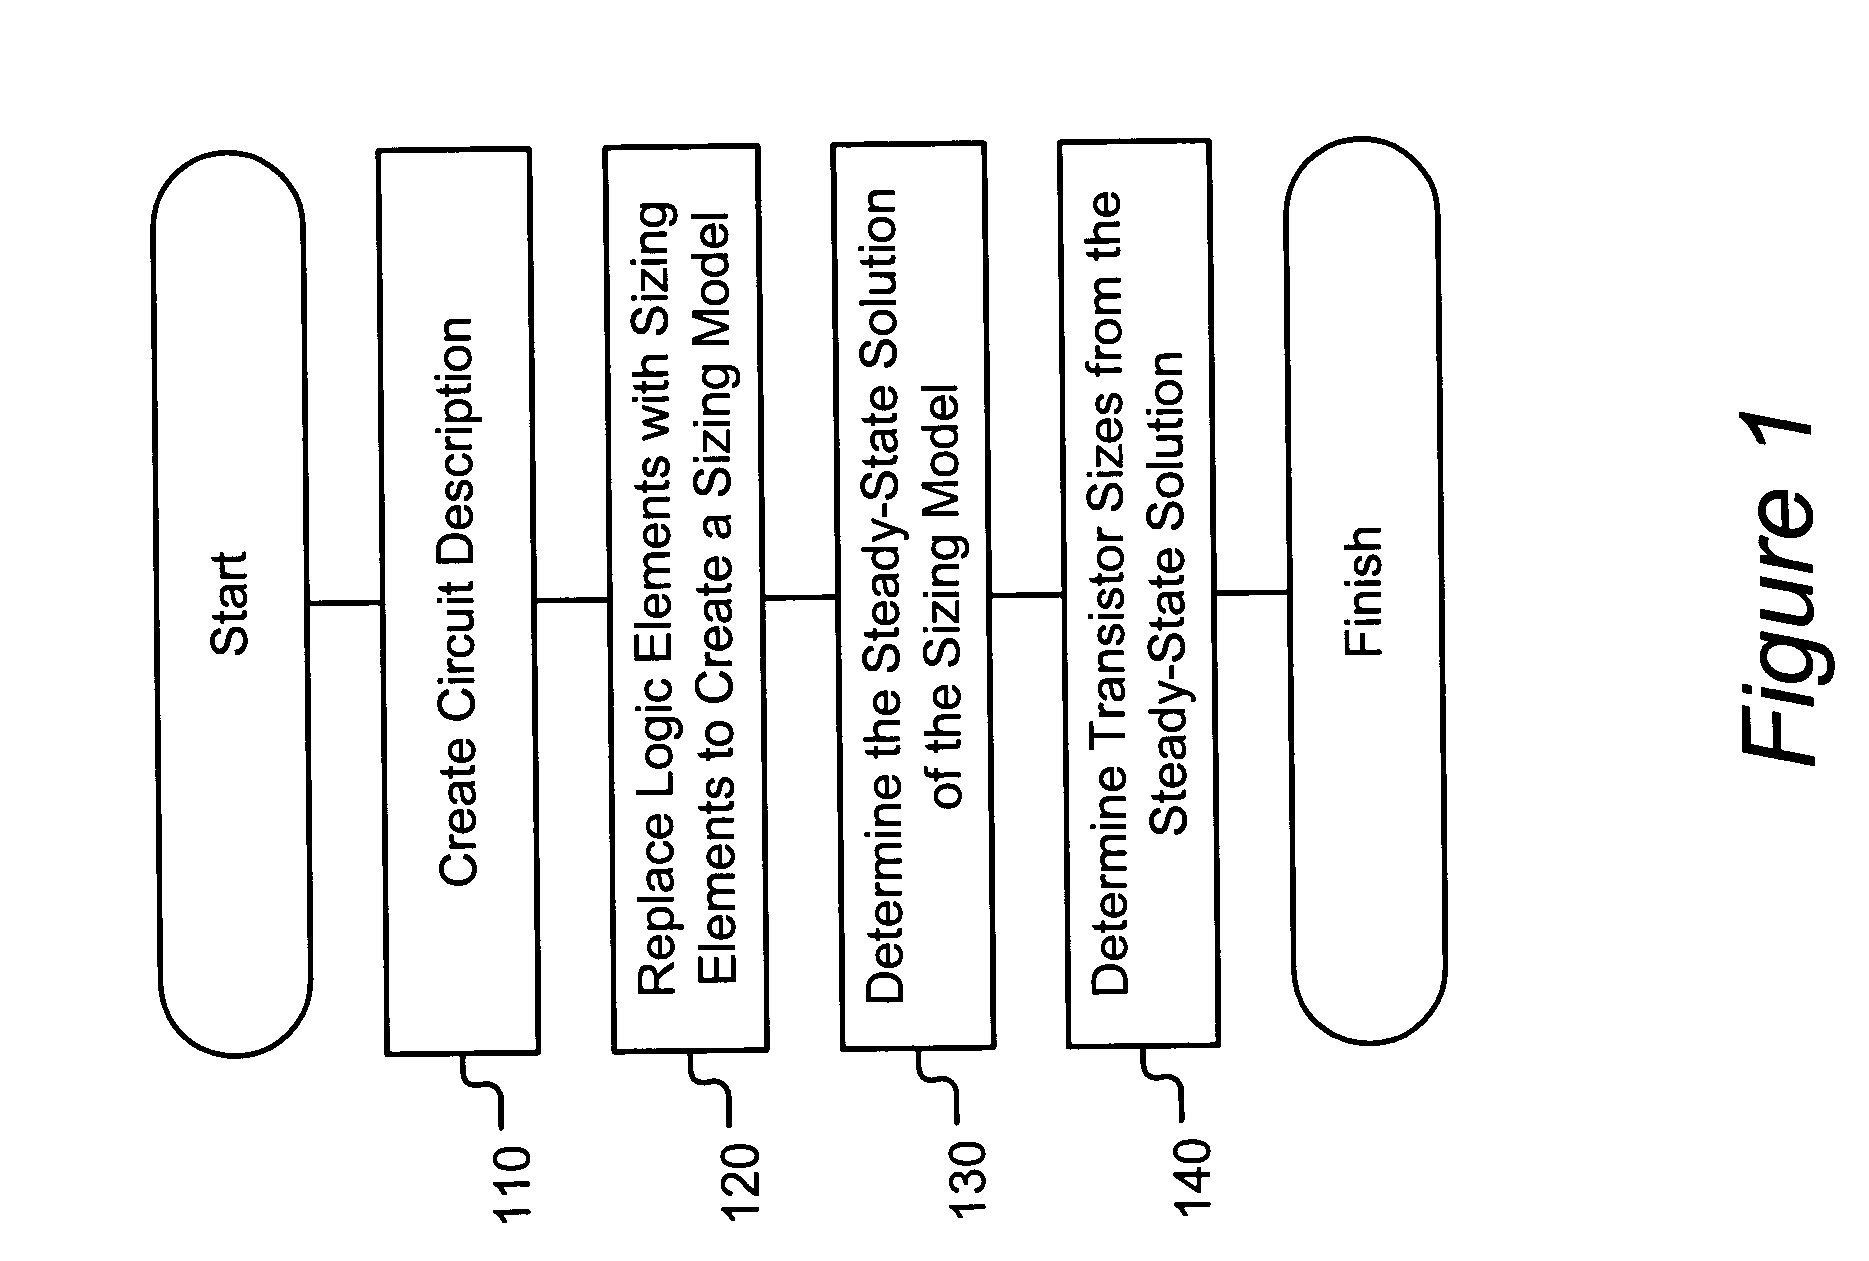 Method and apparatus for determining transistor sizes